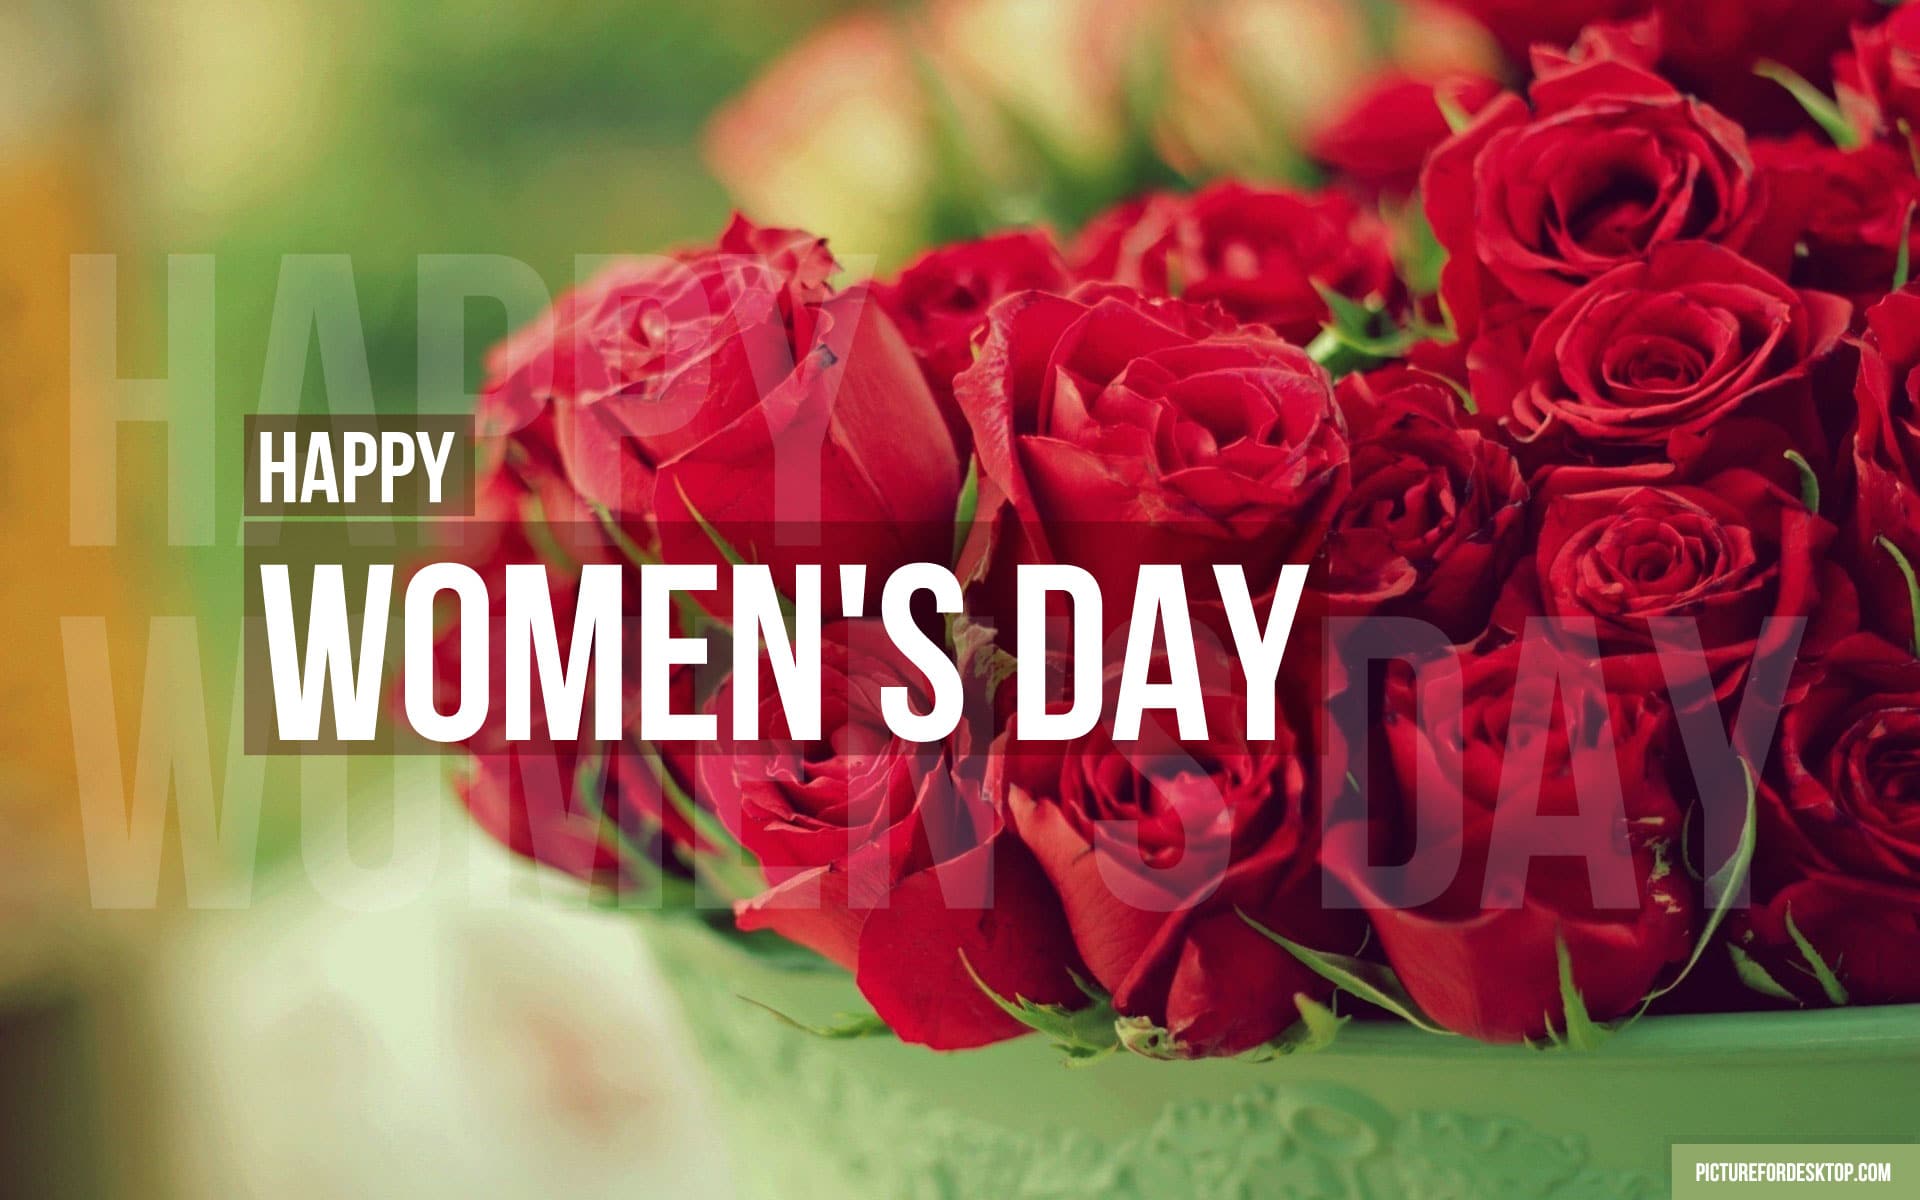 Happy Women's Day Image and Wallpaper